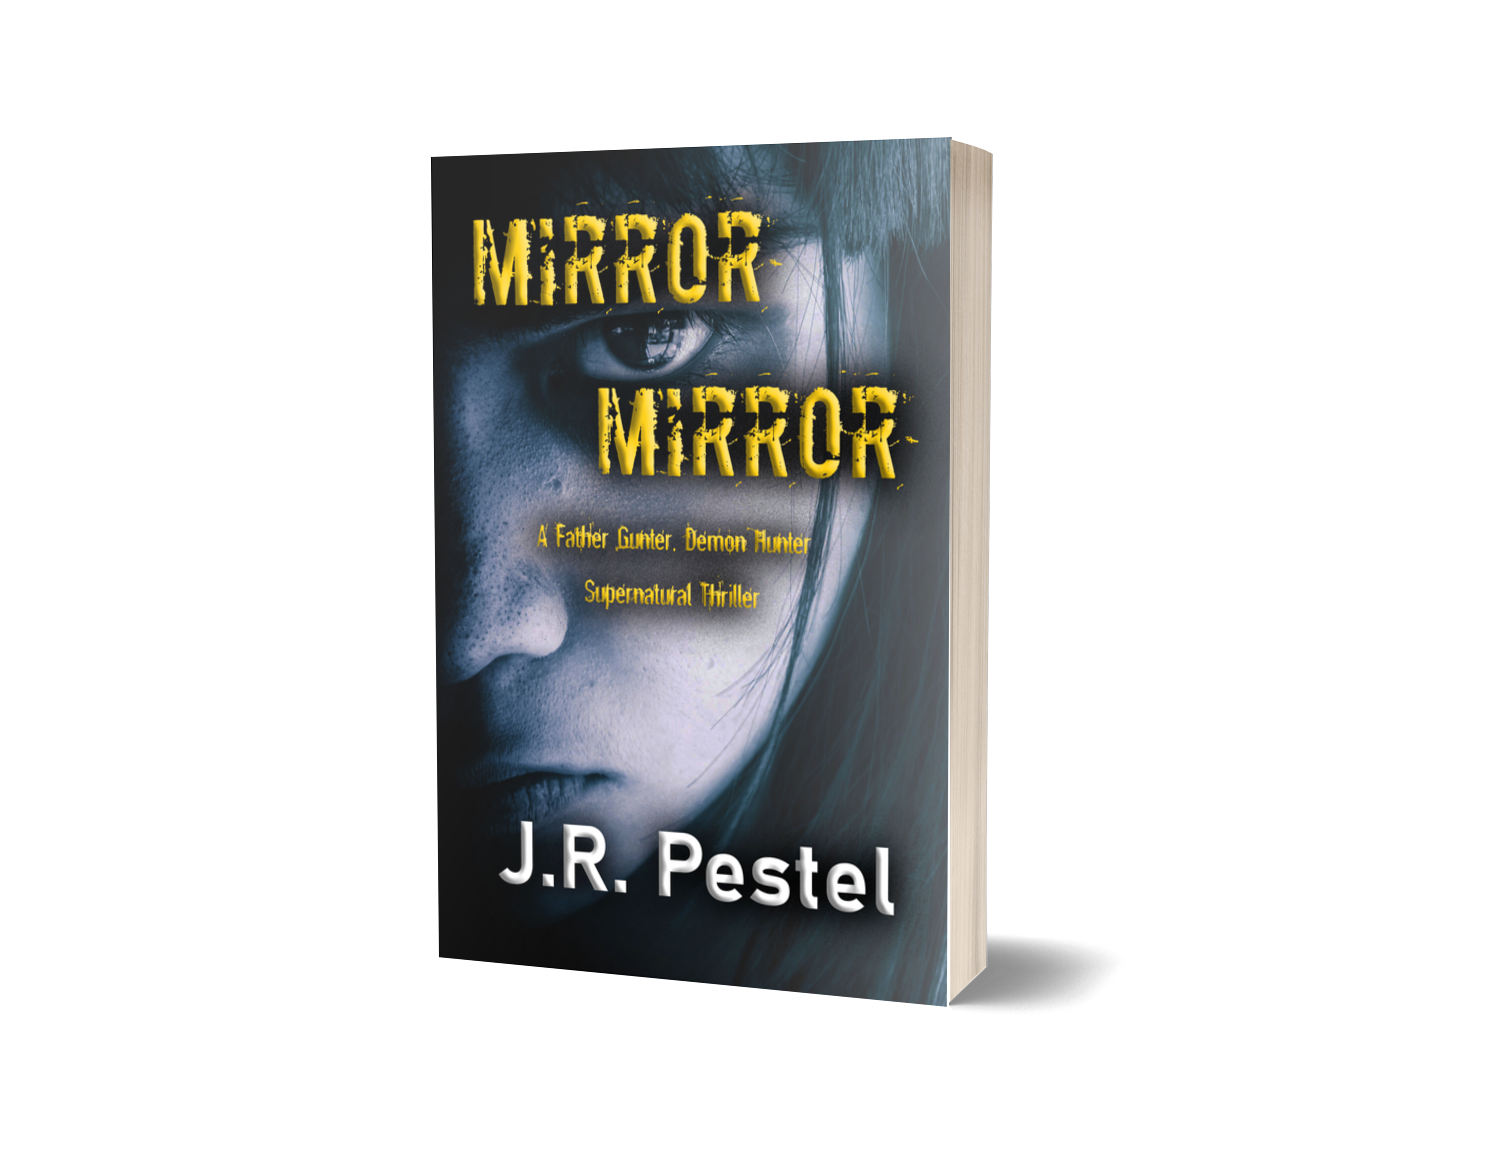 Paperback copy of “Mirror, Mirror” – 7th book in the “Father Gunter, Demon Hunter” supernatural thriller series signed by the author Giveaway